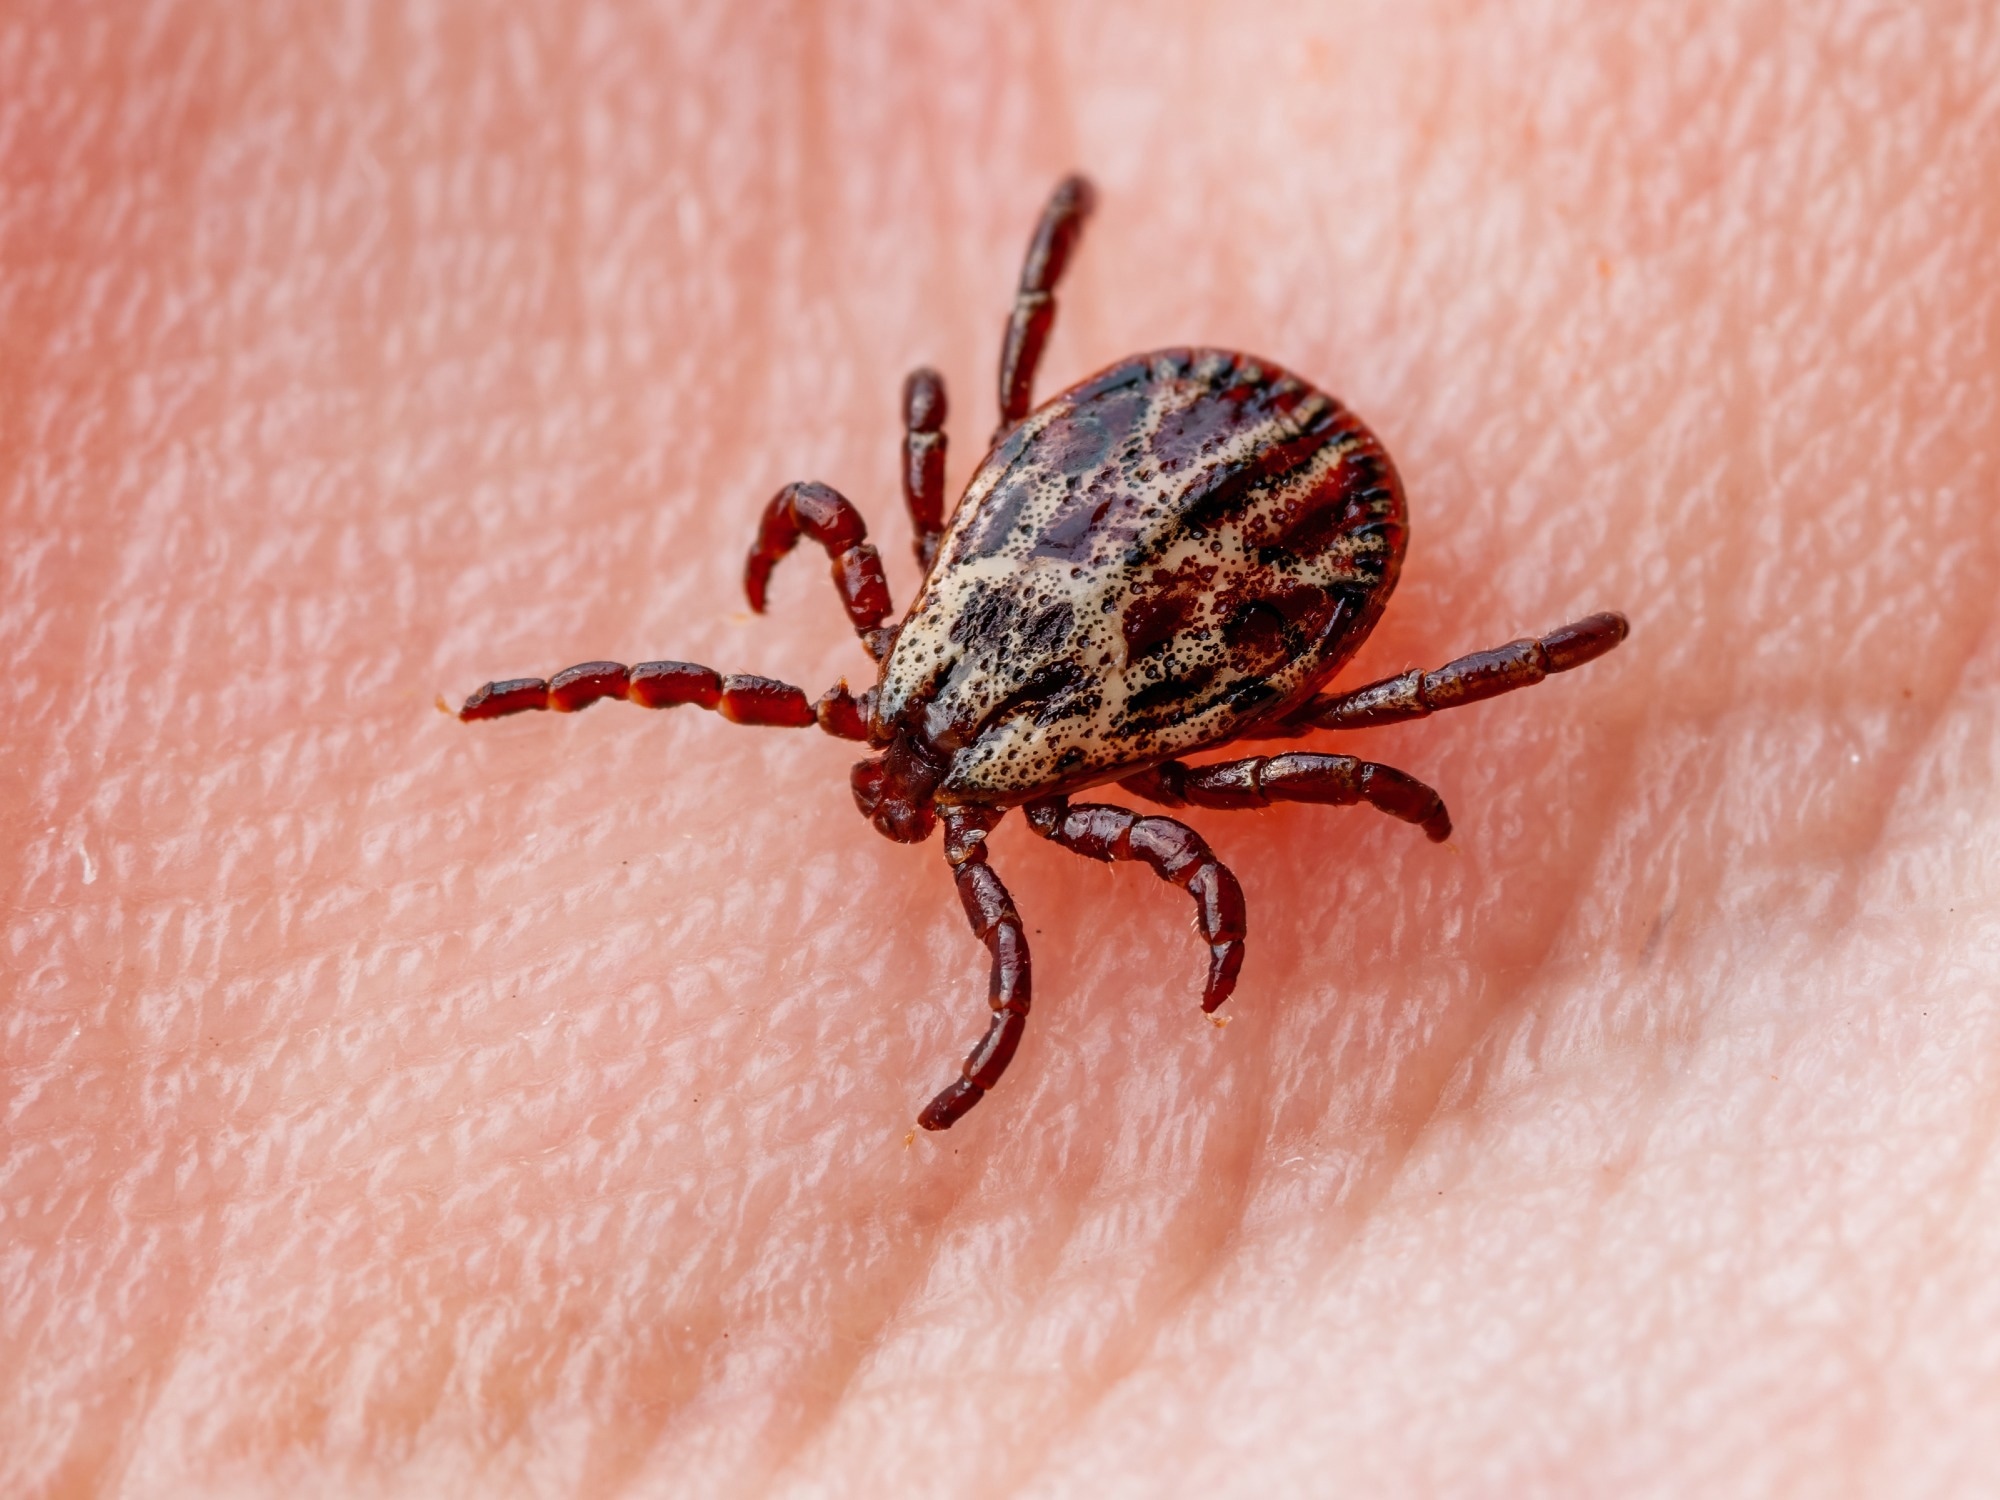 Study: Tick-Borne Disease Infections and Chronic Musculoskeletal Pain. Image Credit: nechaevkon/Shutterstock.com